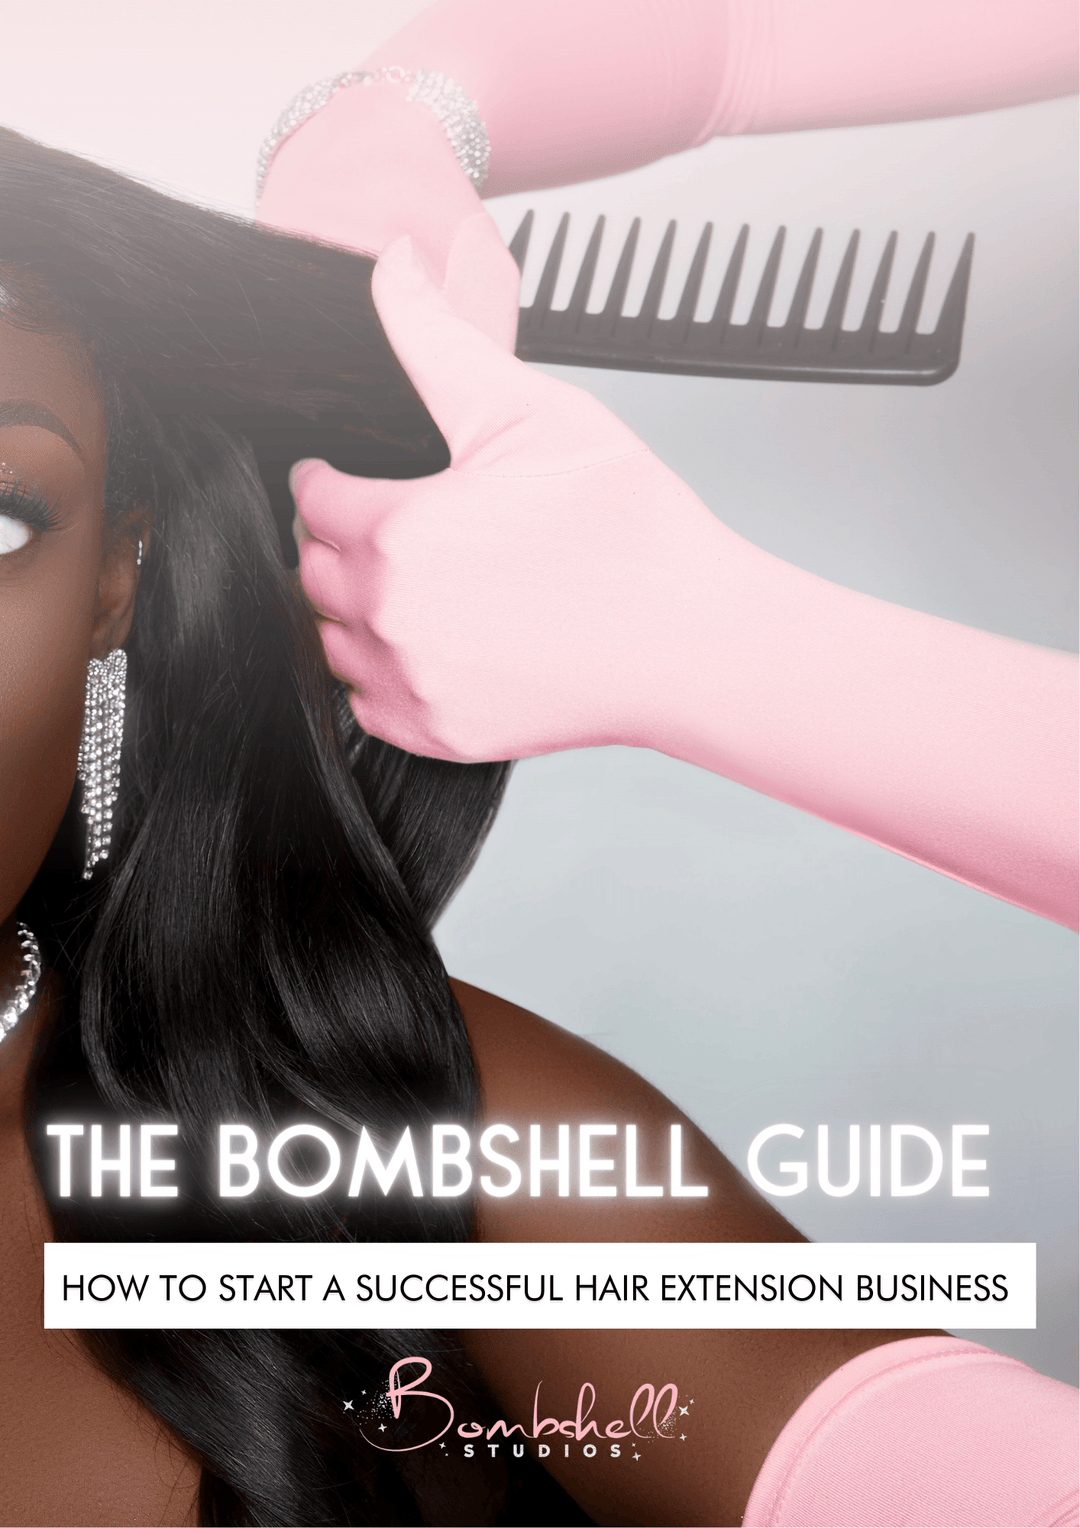 The Bombshell Guide: How to start a successful hair extension business - Bombshell Studios CT